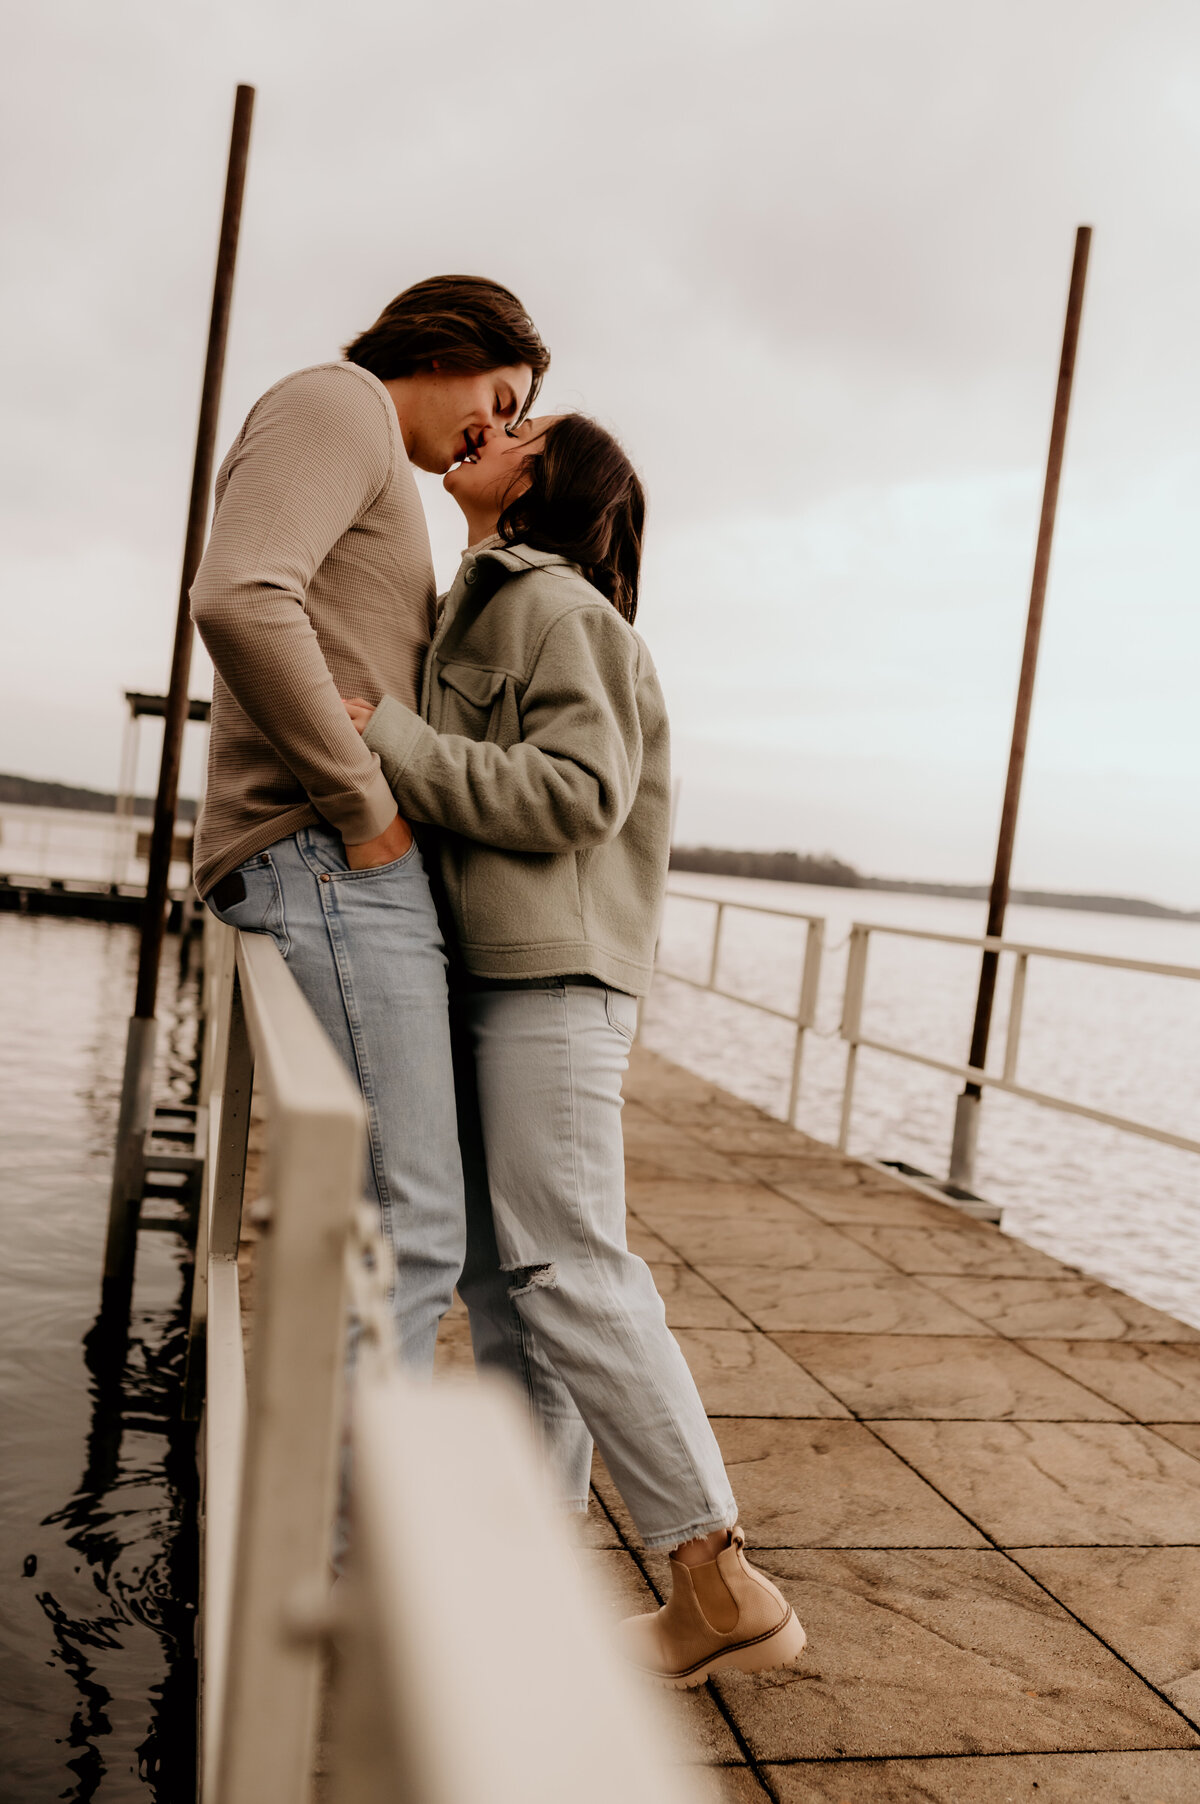 Little rock engagement photographer captured woman leaning against a man as he leans down and kisses her while she wraps her arm around him at the waist